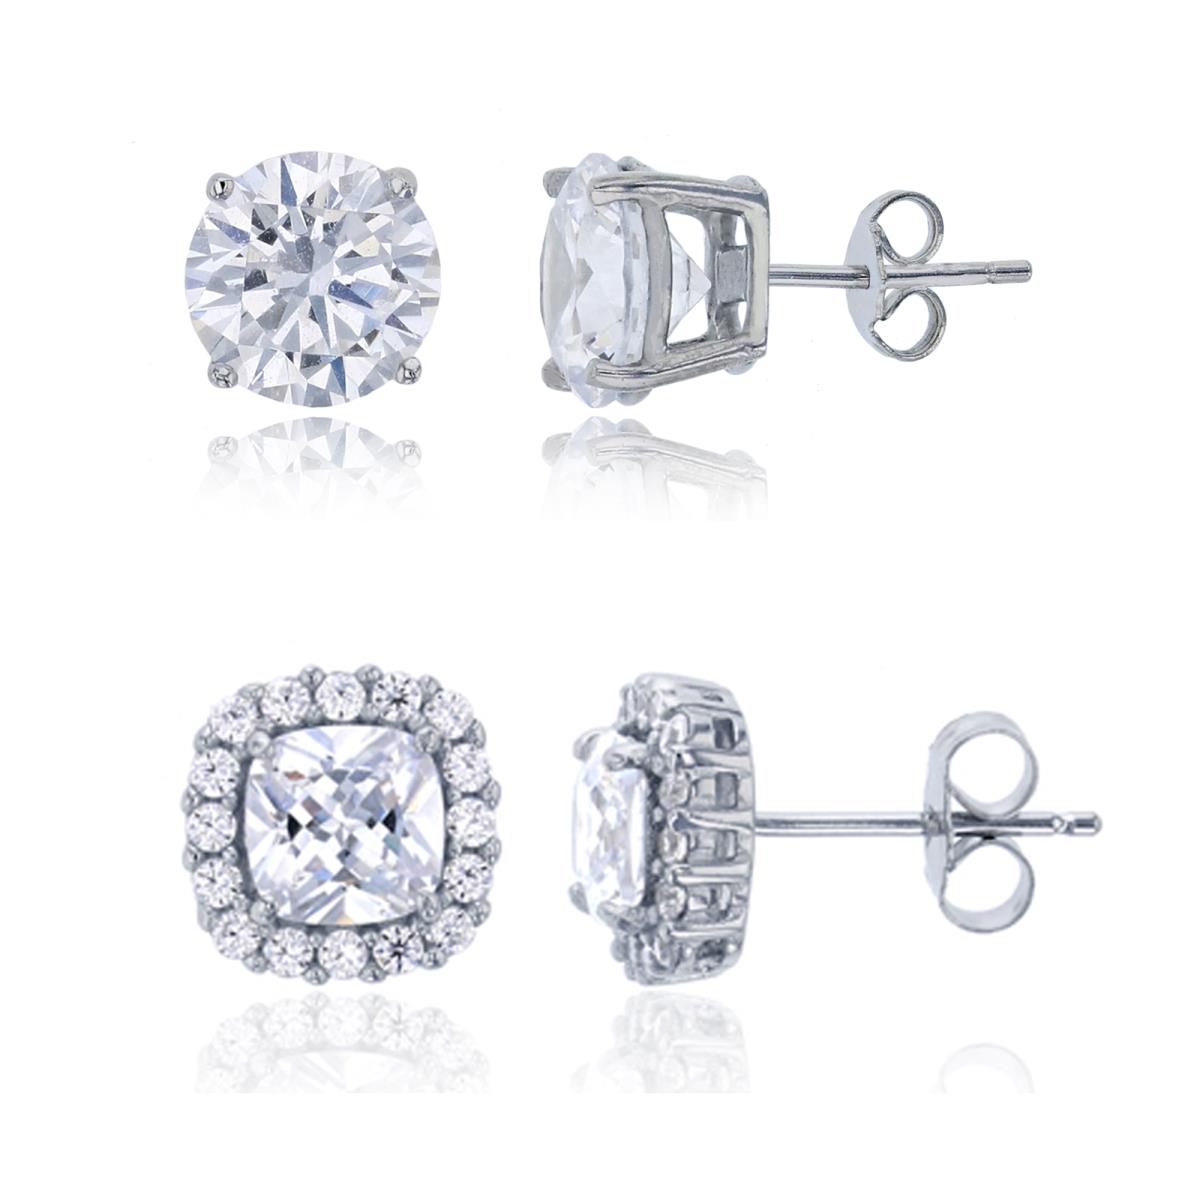 Sterling Silver Rhodium Halo Pave Square & 8mm Round Solitaire Stud Earring Set